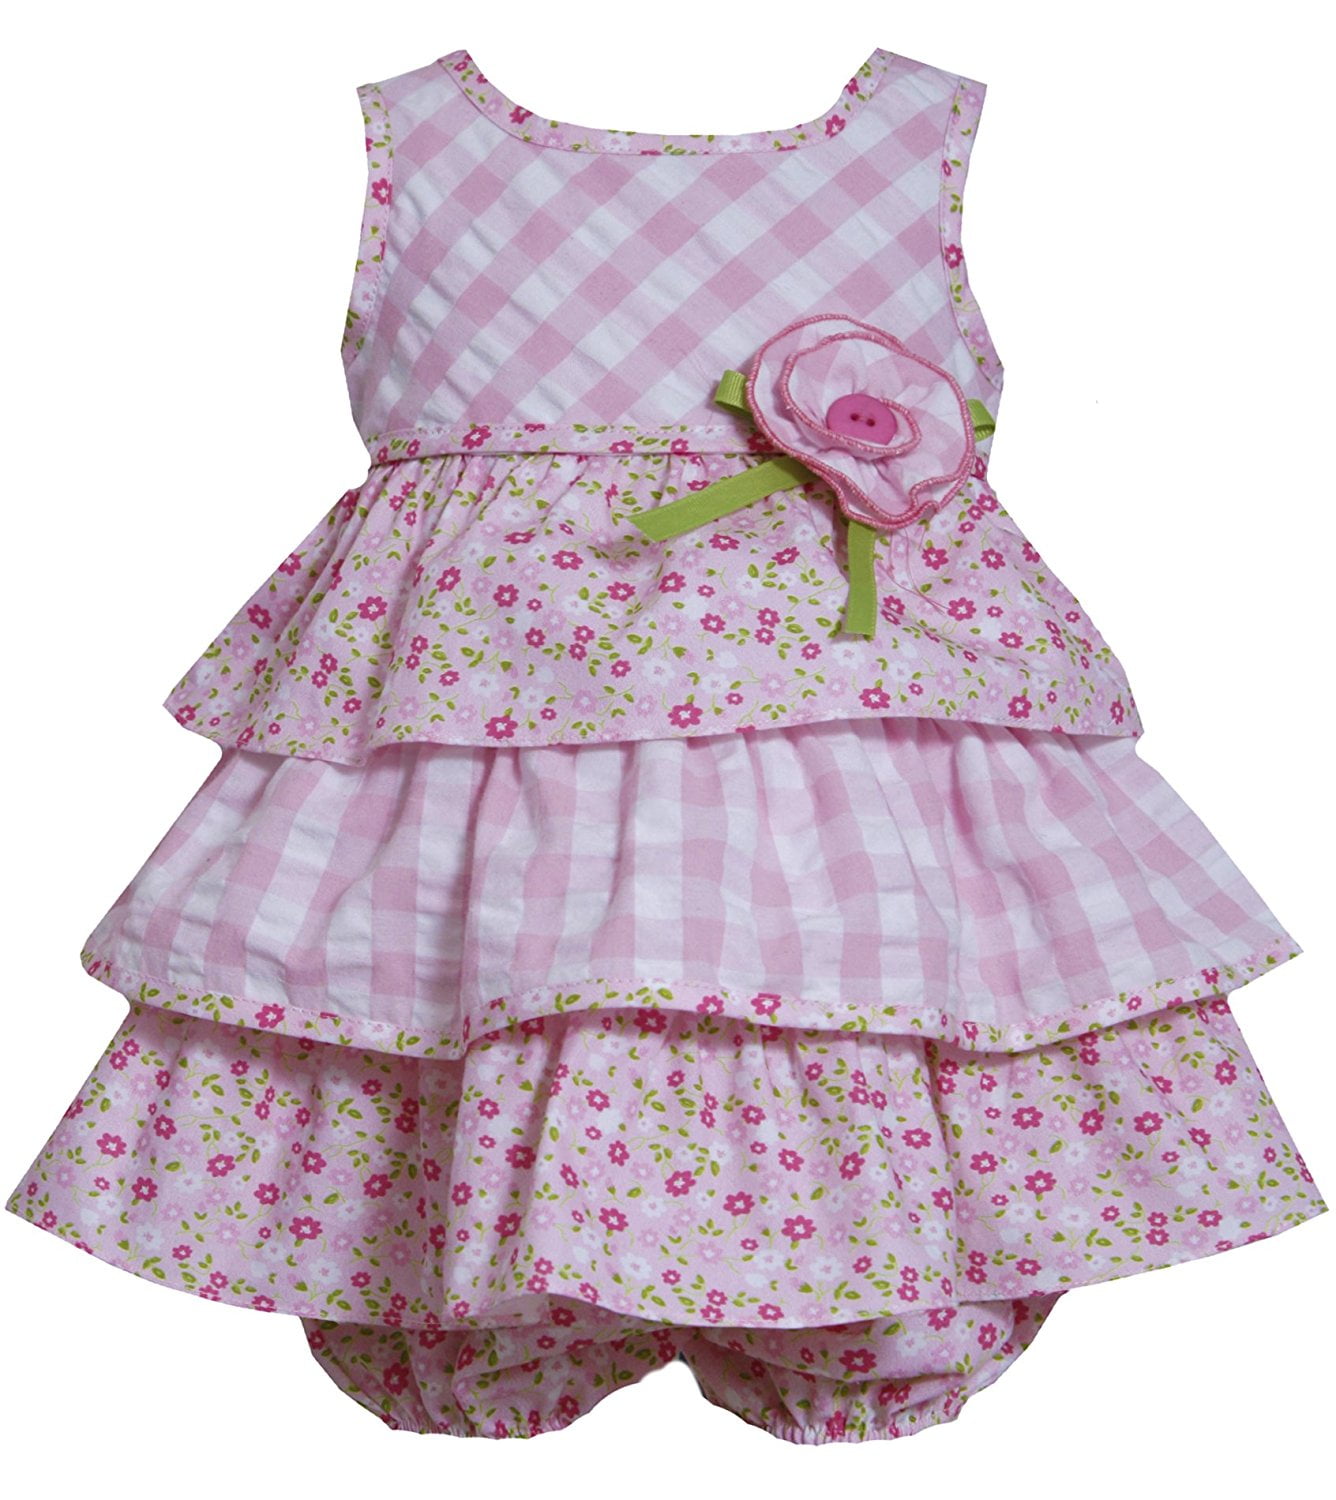 Bonnie Jean Girls Spring Summer Pink Embroidery Tiered Dress Outfit 12M 18M 24M 